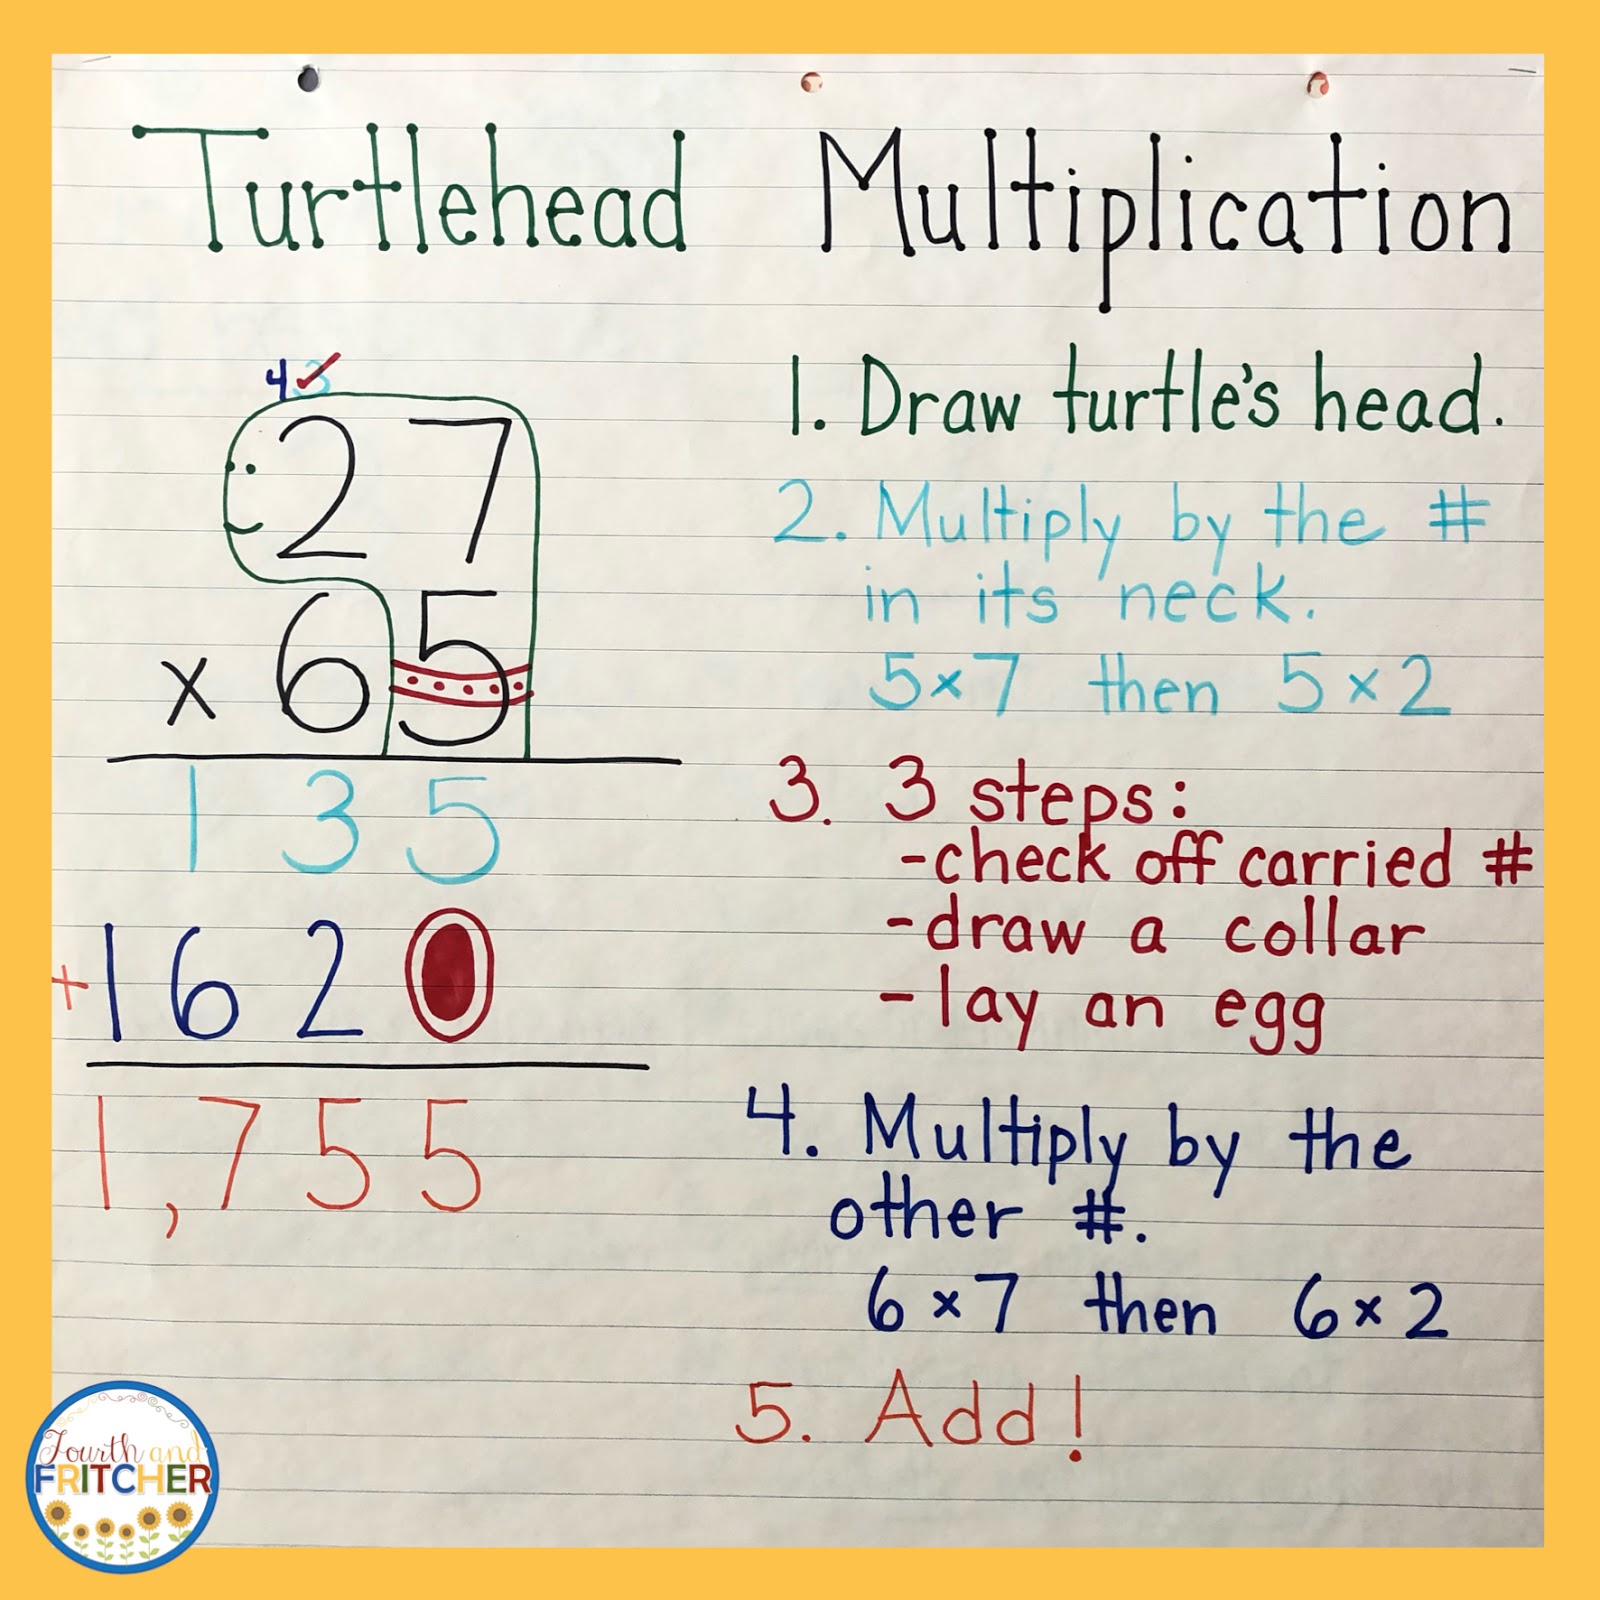 multiply-4-digit-and-1-digit-numbers-vertical-multiplication-math